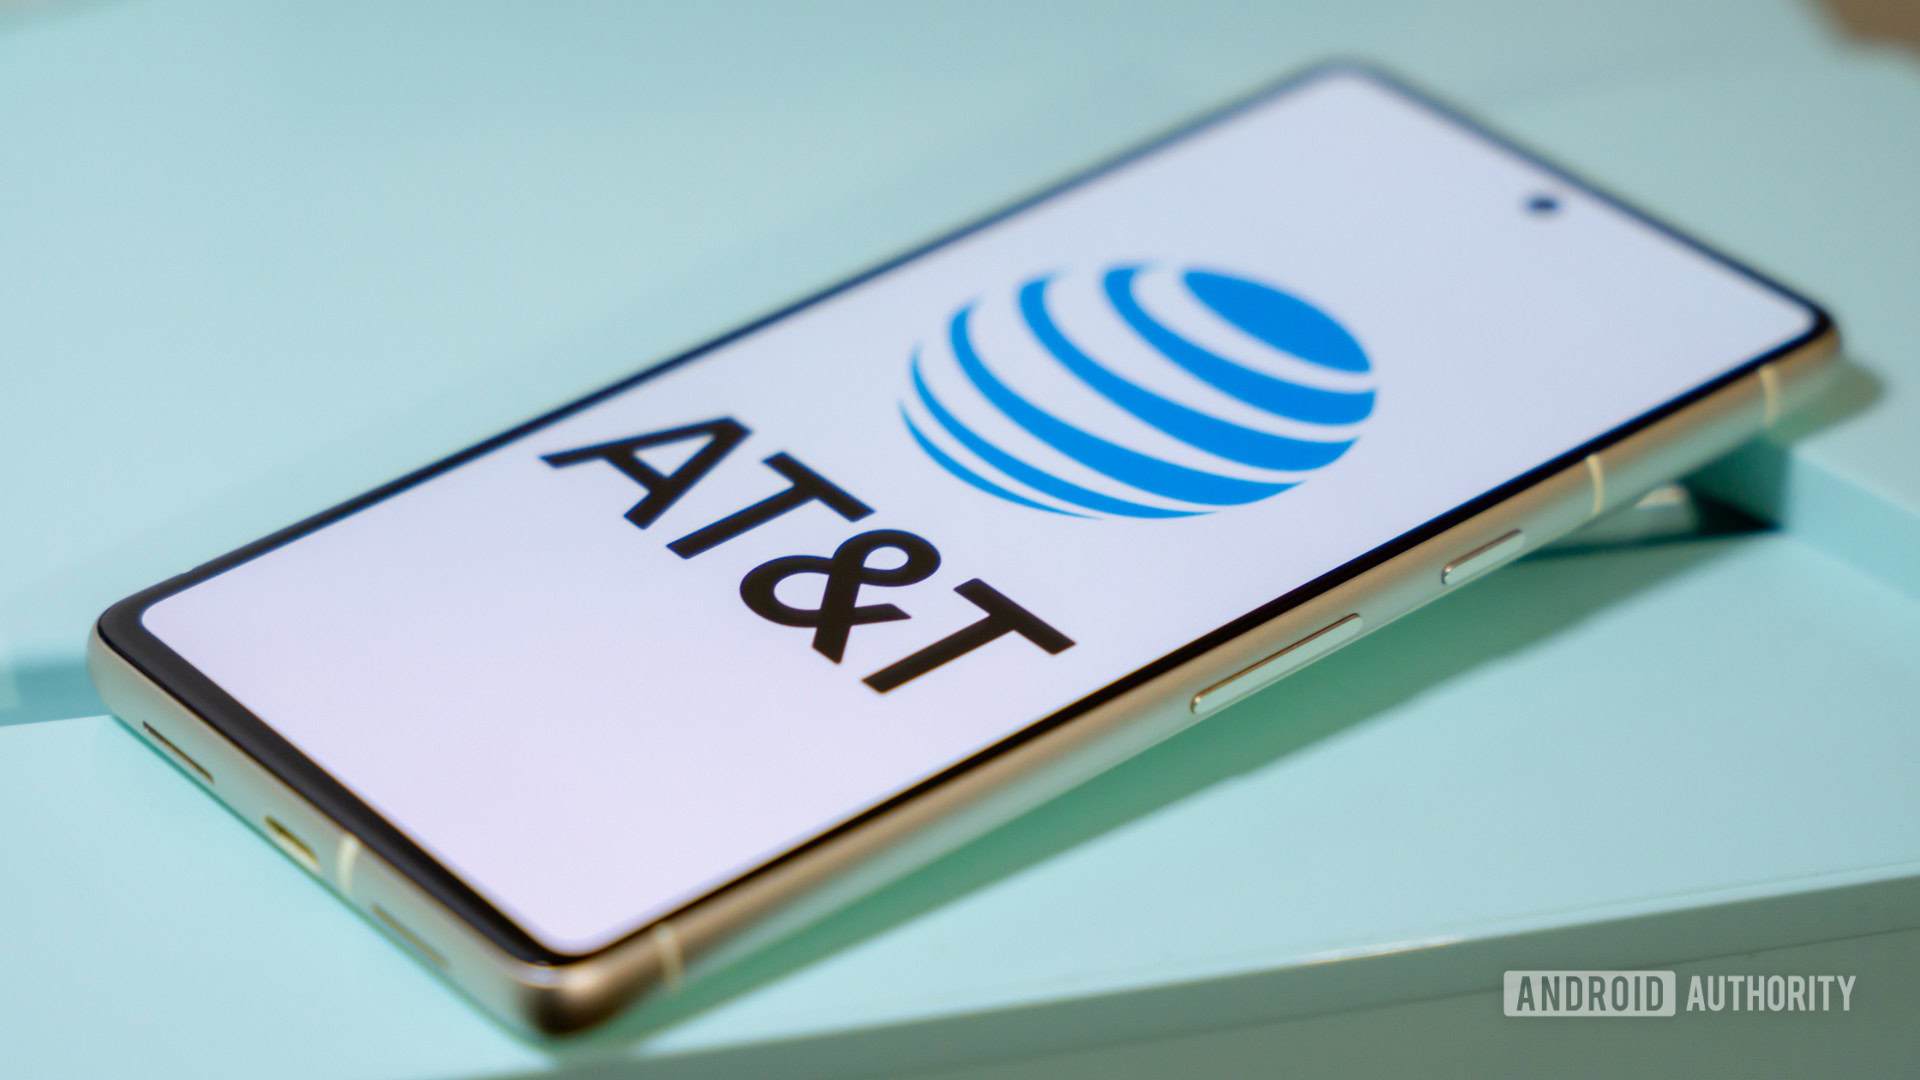 AT&T logo on smartphone (2)